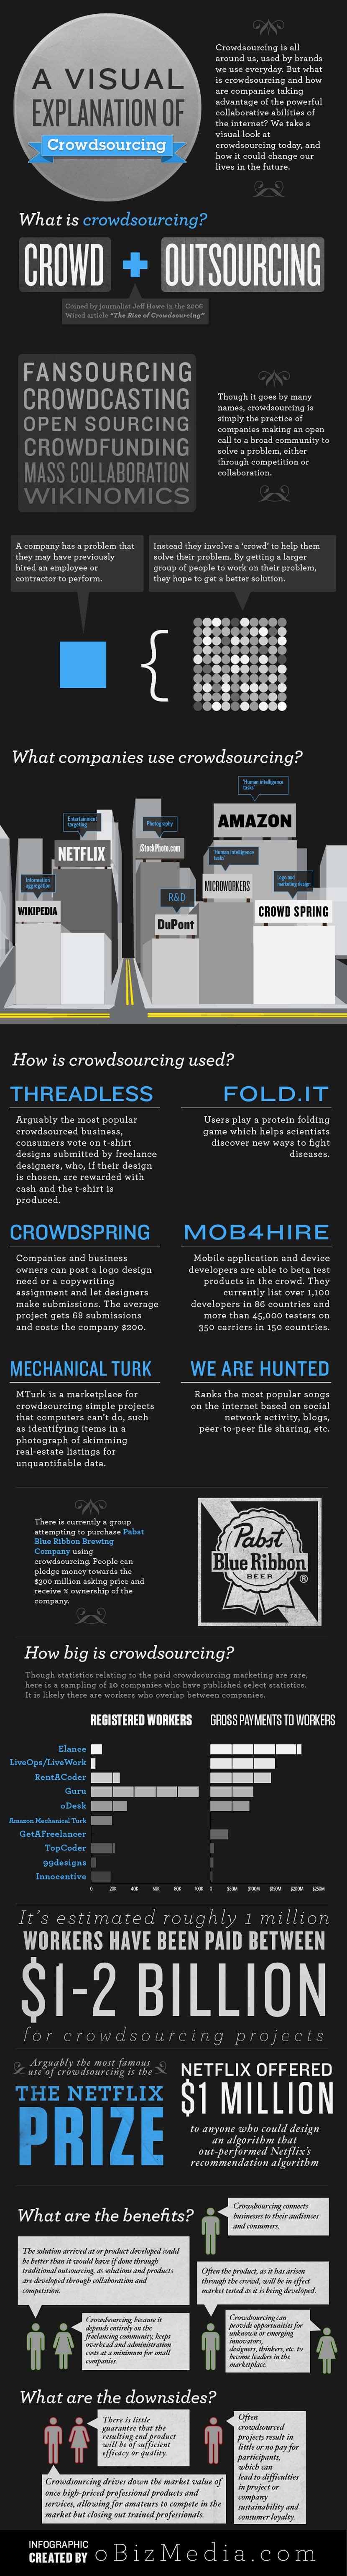 Infographic-What-is-Crowdsourcing.jpg